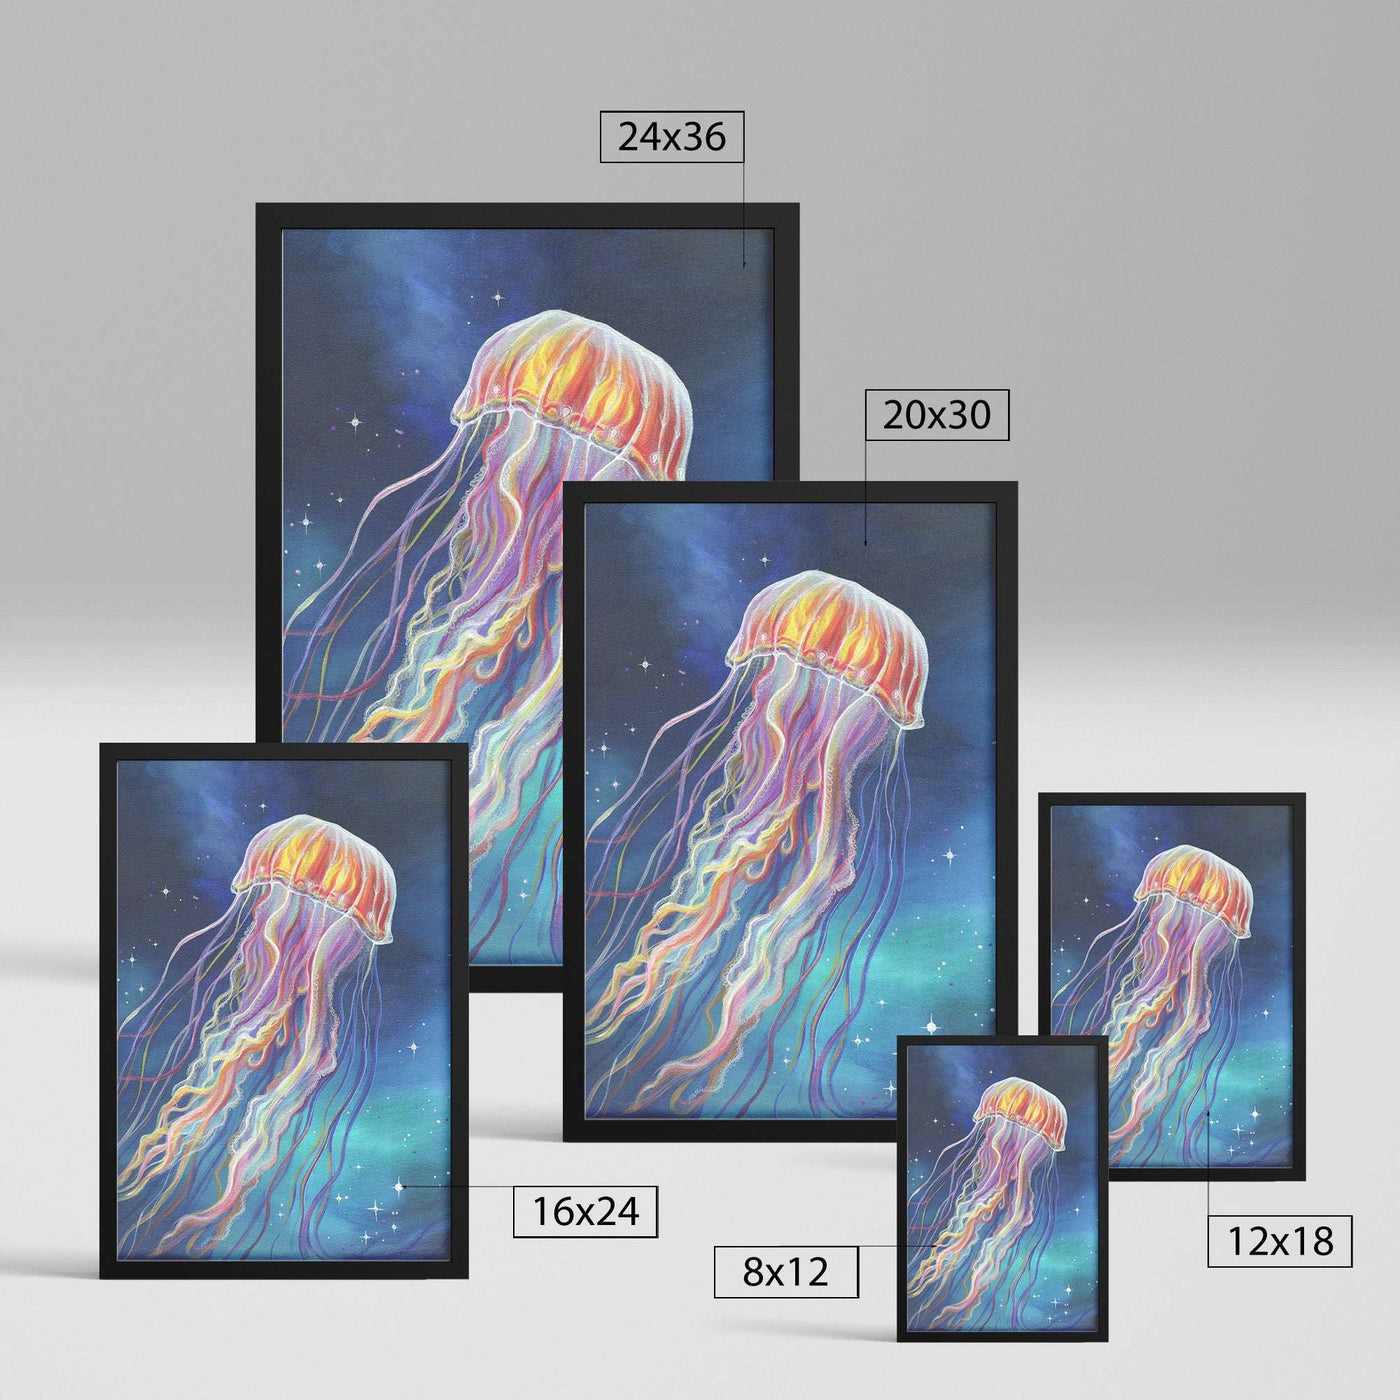 A display of five Framed Jellyfish Prints, featuring a colorful jellyfish design, arranged by size with dimensions labeled.